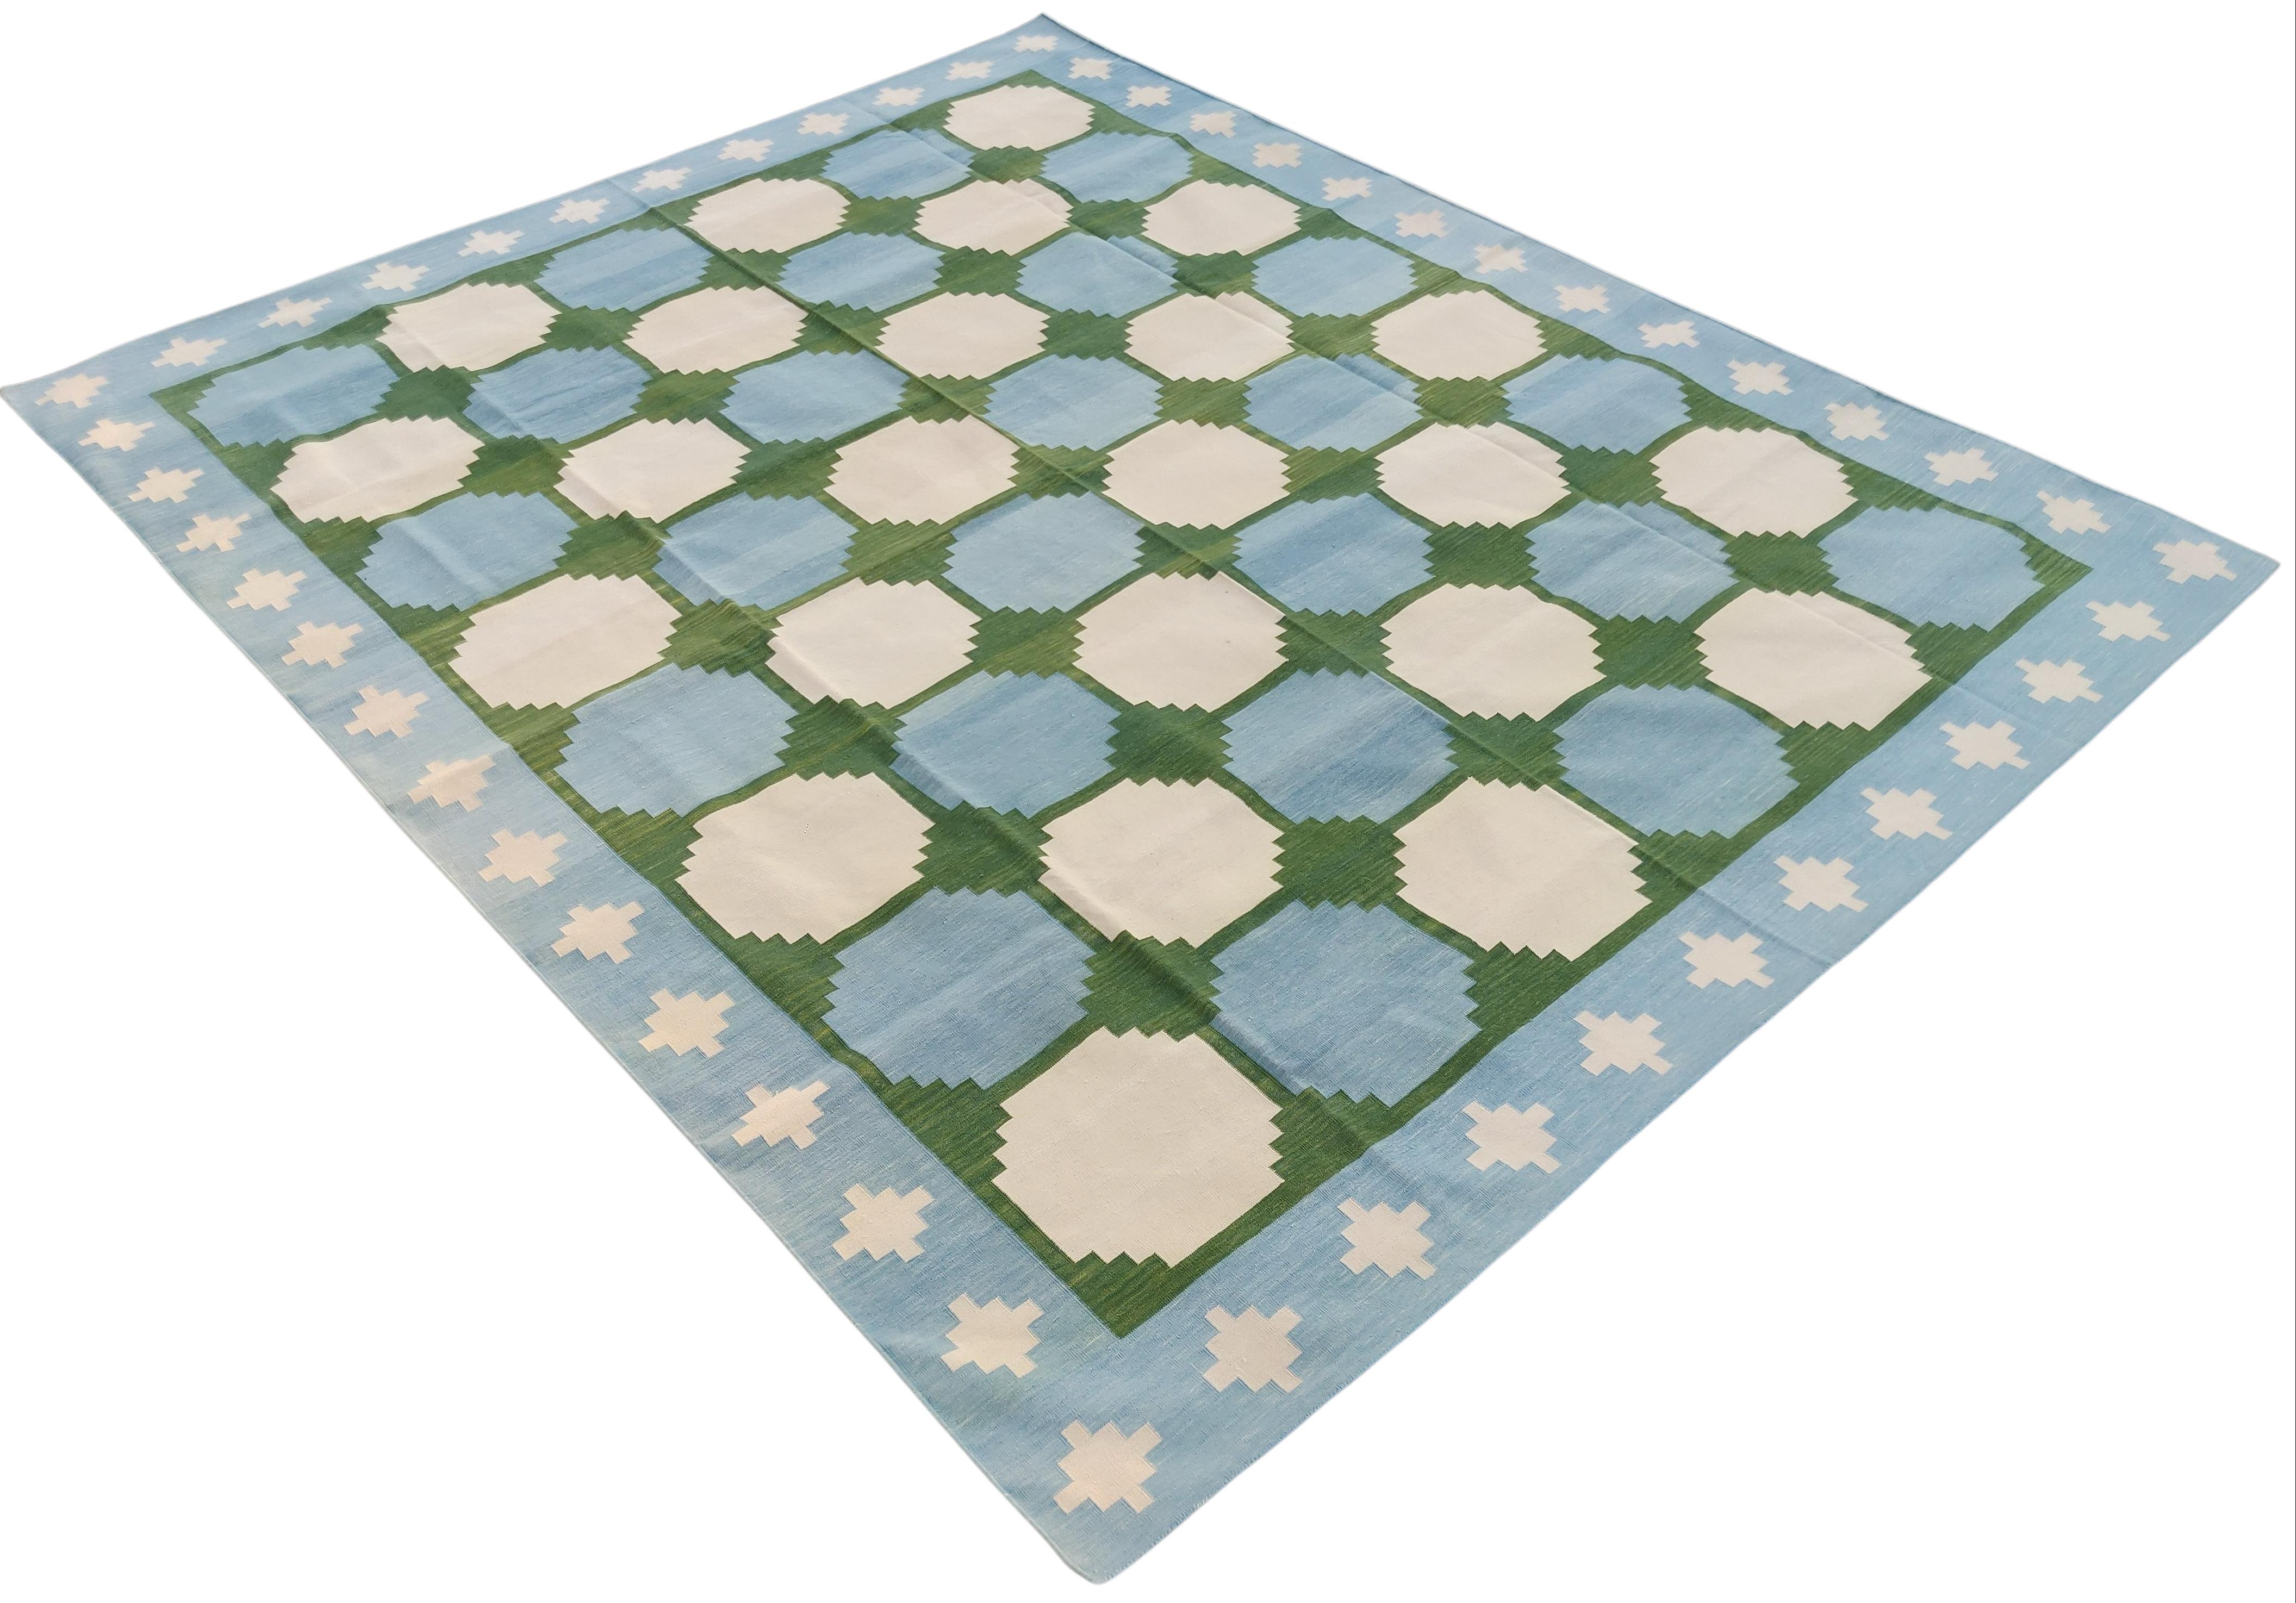 Cotton Natural Vegetable Dyed Forest Green , Sky Blue And Cream Tile Patterned Swedish Rug-5'x8'
These special flat-weave dhurries are hand-woven with 15 ply 100% cotton yarn. Due to the special manufacturing techniques used to create our rugs, the